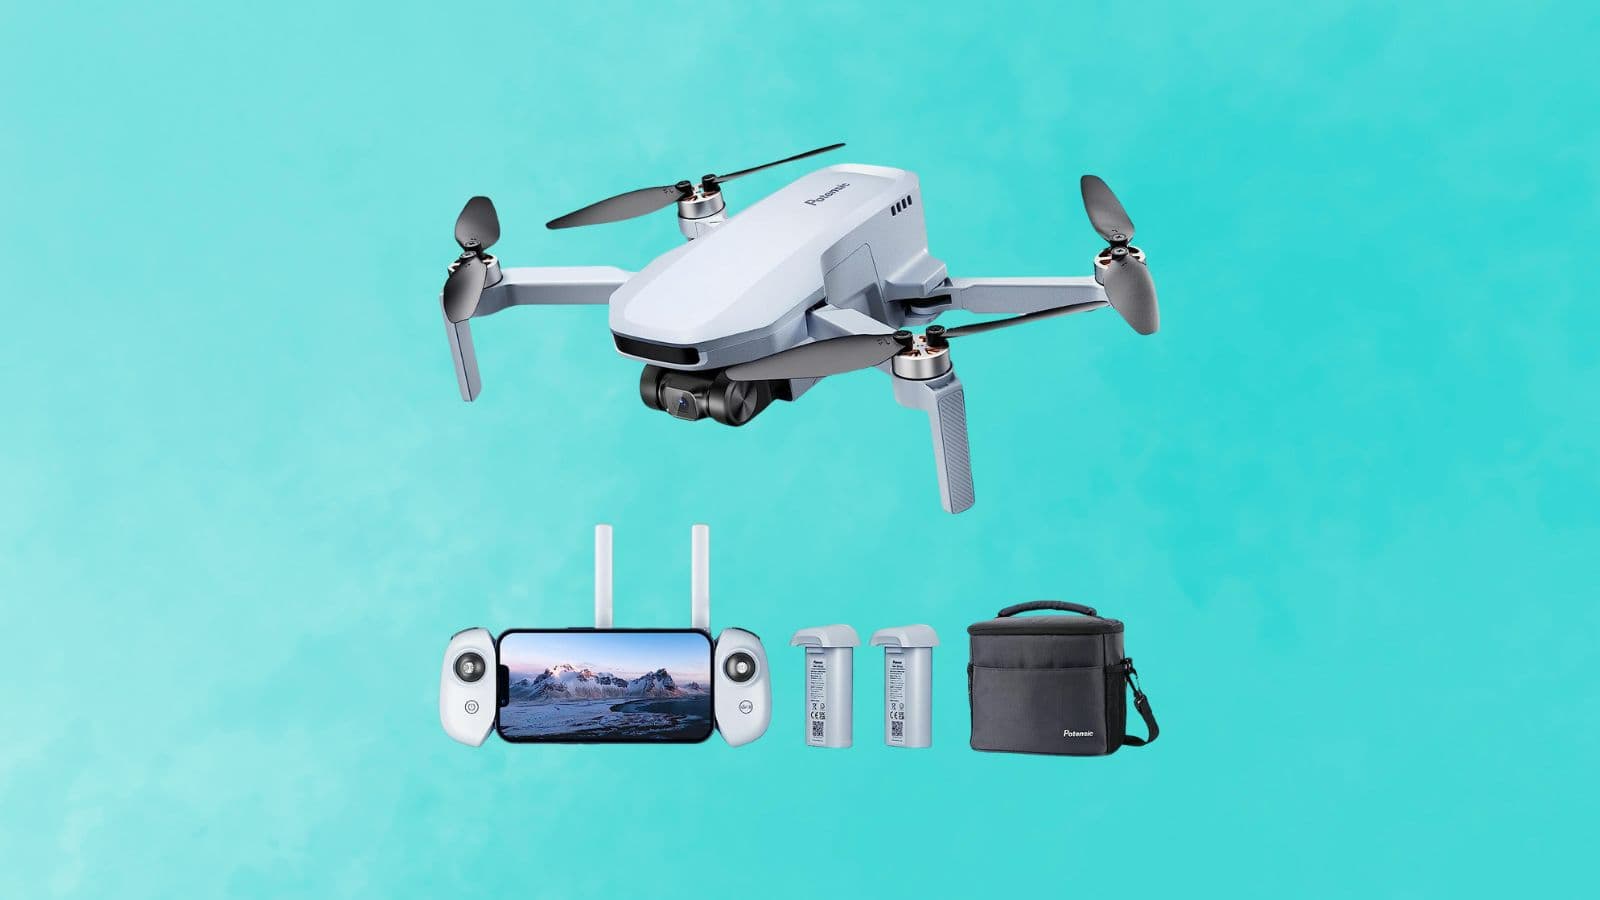 This drone is not from DJI, but it is well equipped with a 4K camera.